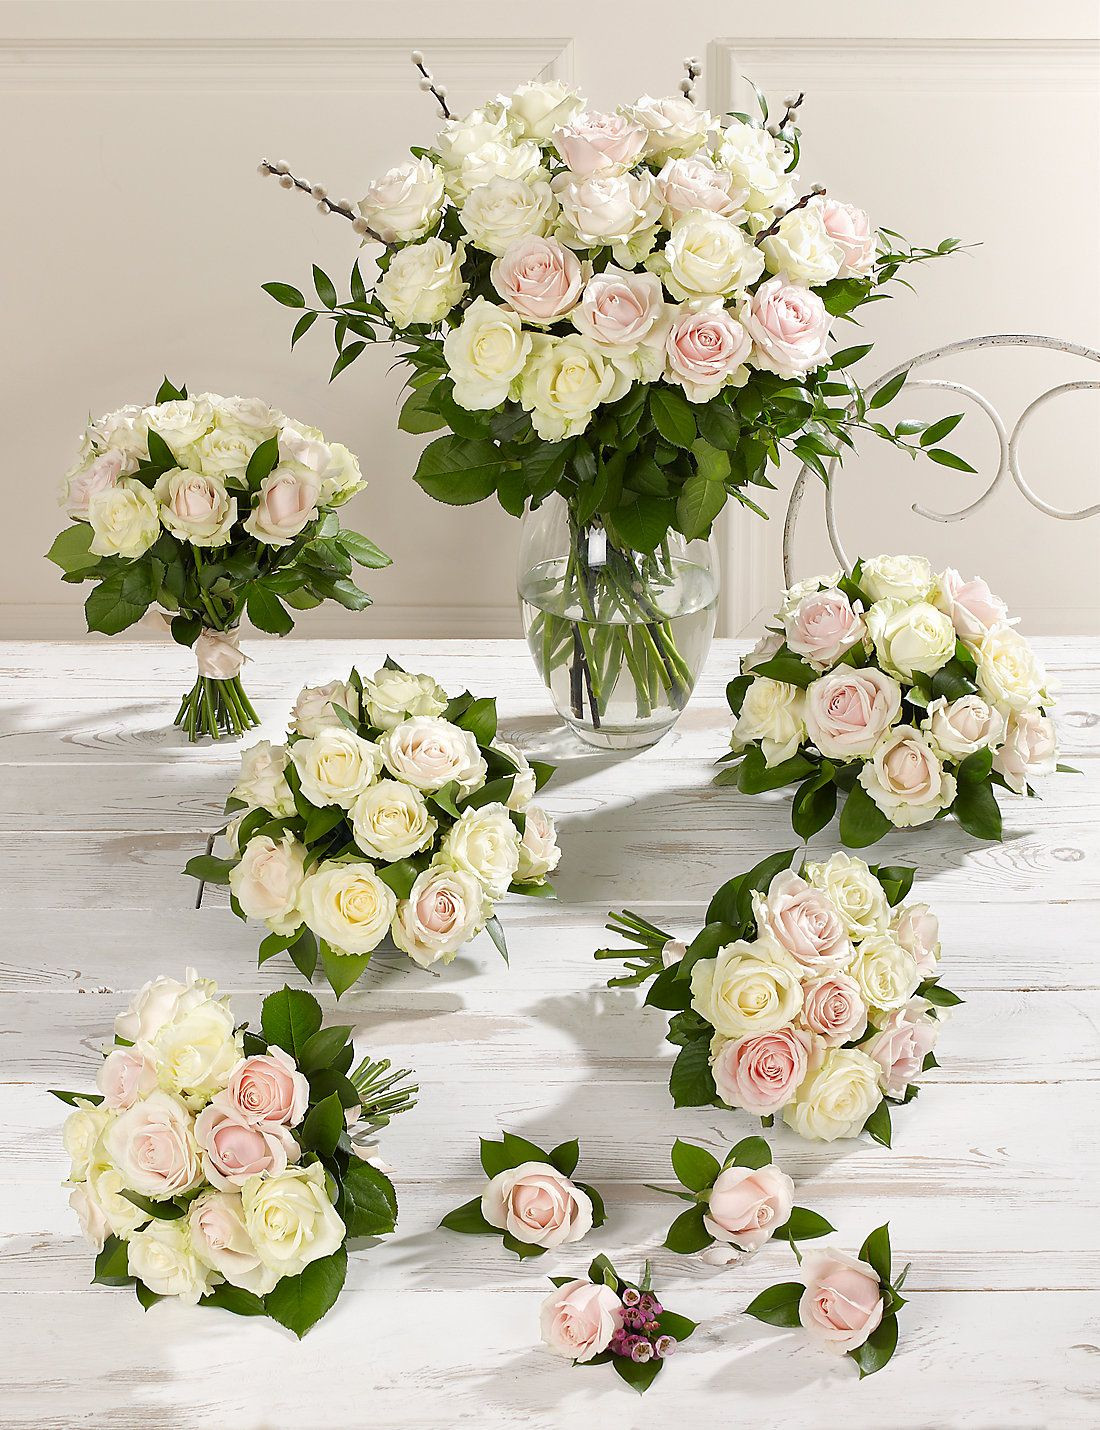 23 Fabulous Artificial Flowers In Vase Marks and Spencer 2024 free download artificial flowers in vase marks and spencer of wedding flowers wedding venue at crown pinterest pink white in marks and spencer flowers